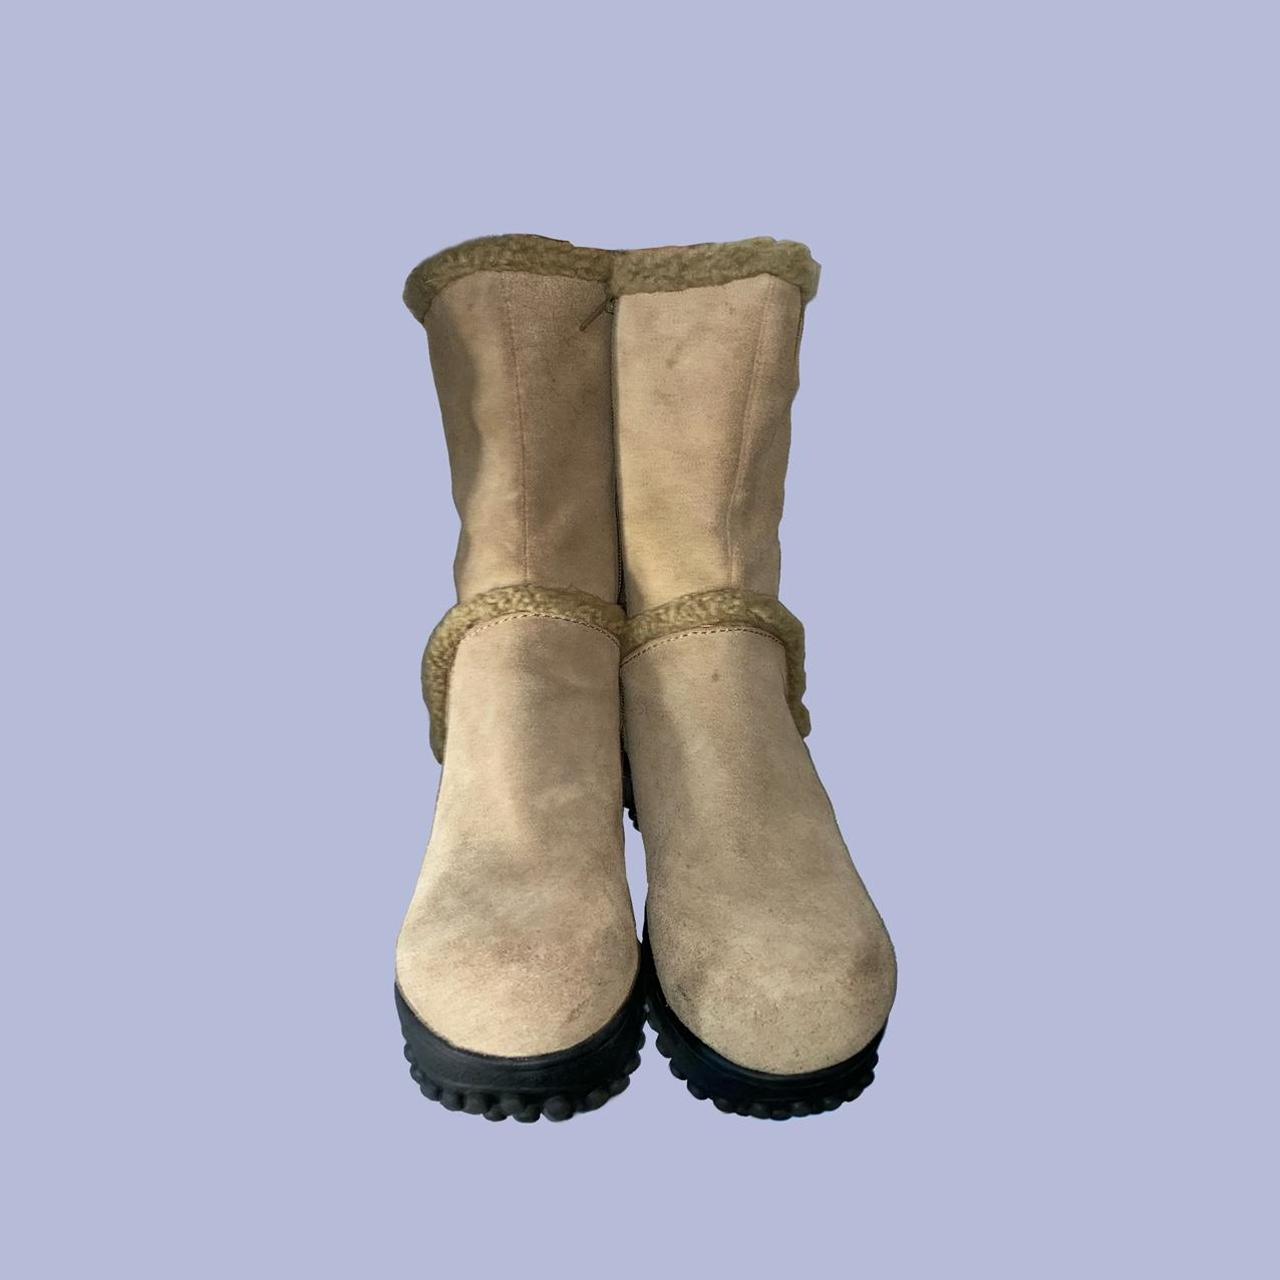 Product Image 4 - Chunky y2k platform suede boots
——————
-In